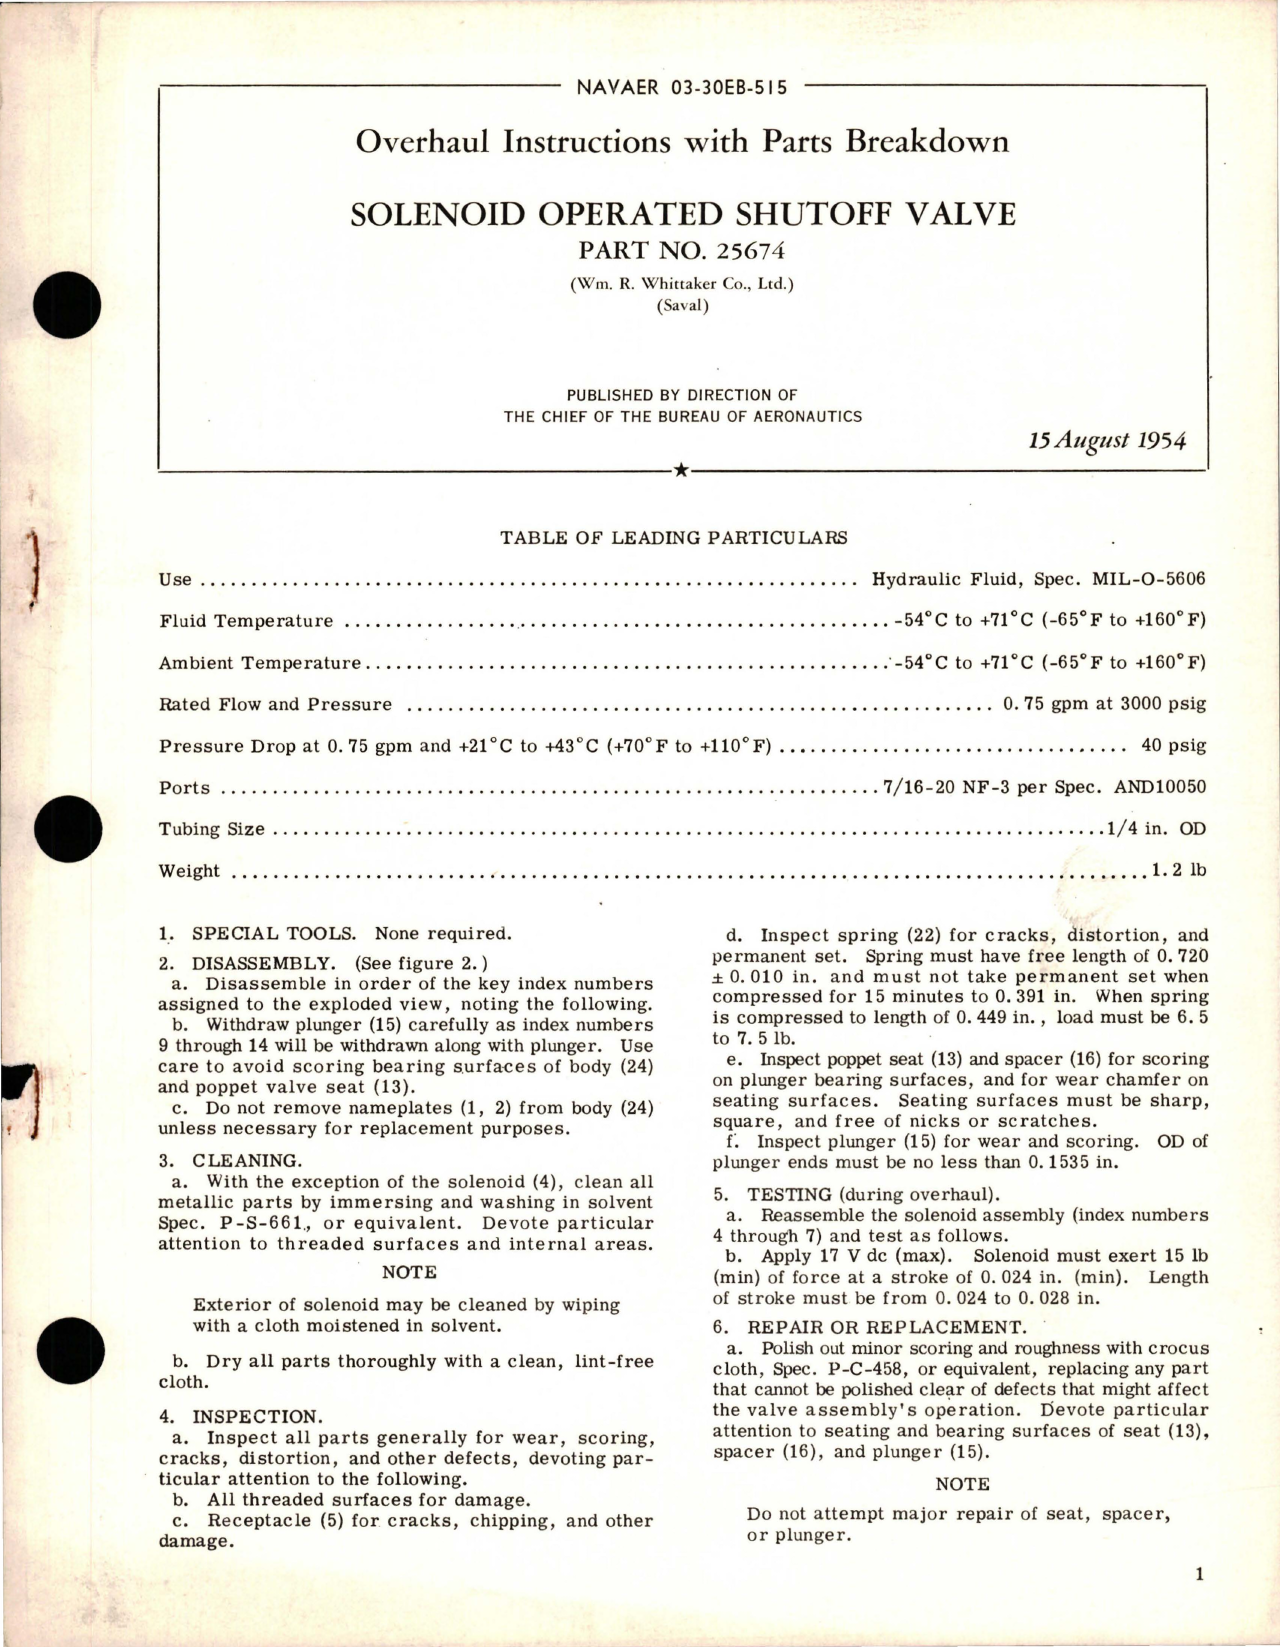 Sample page 1 from AirCorps Library document: Overhaul Instructions with Parts Breakdown for Solenoid Operated Shutoff Valve - Part 25674